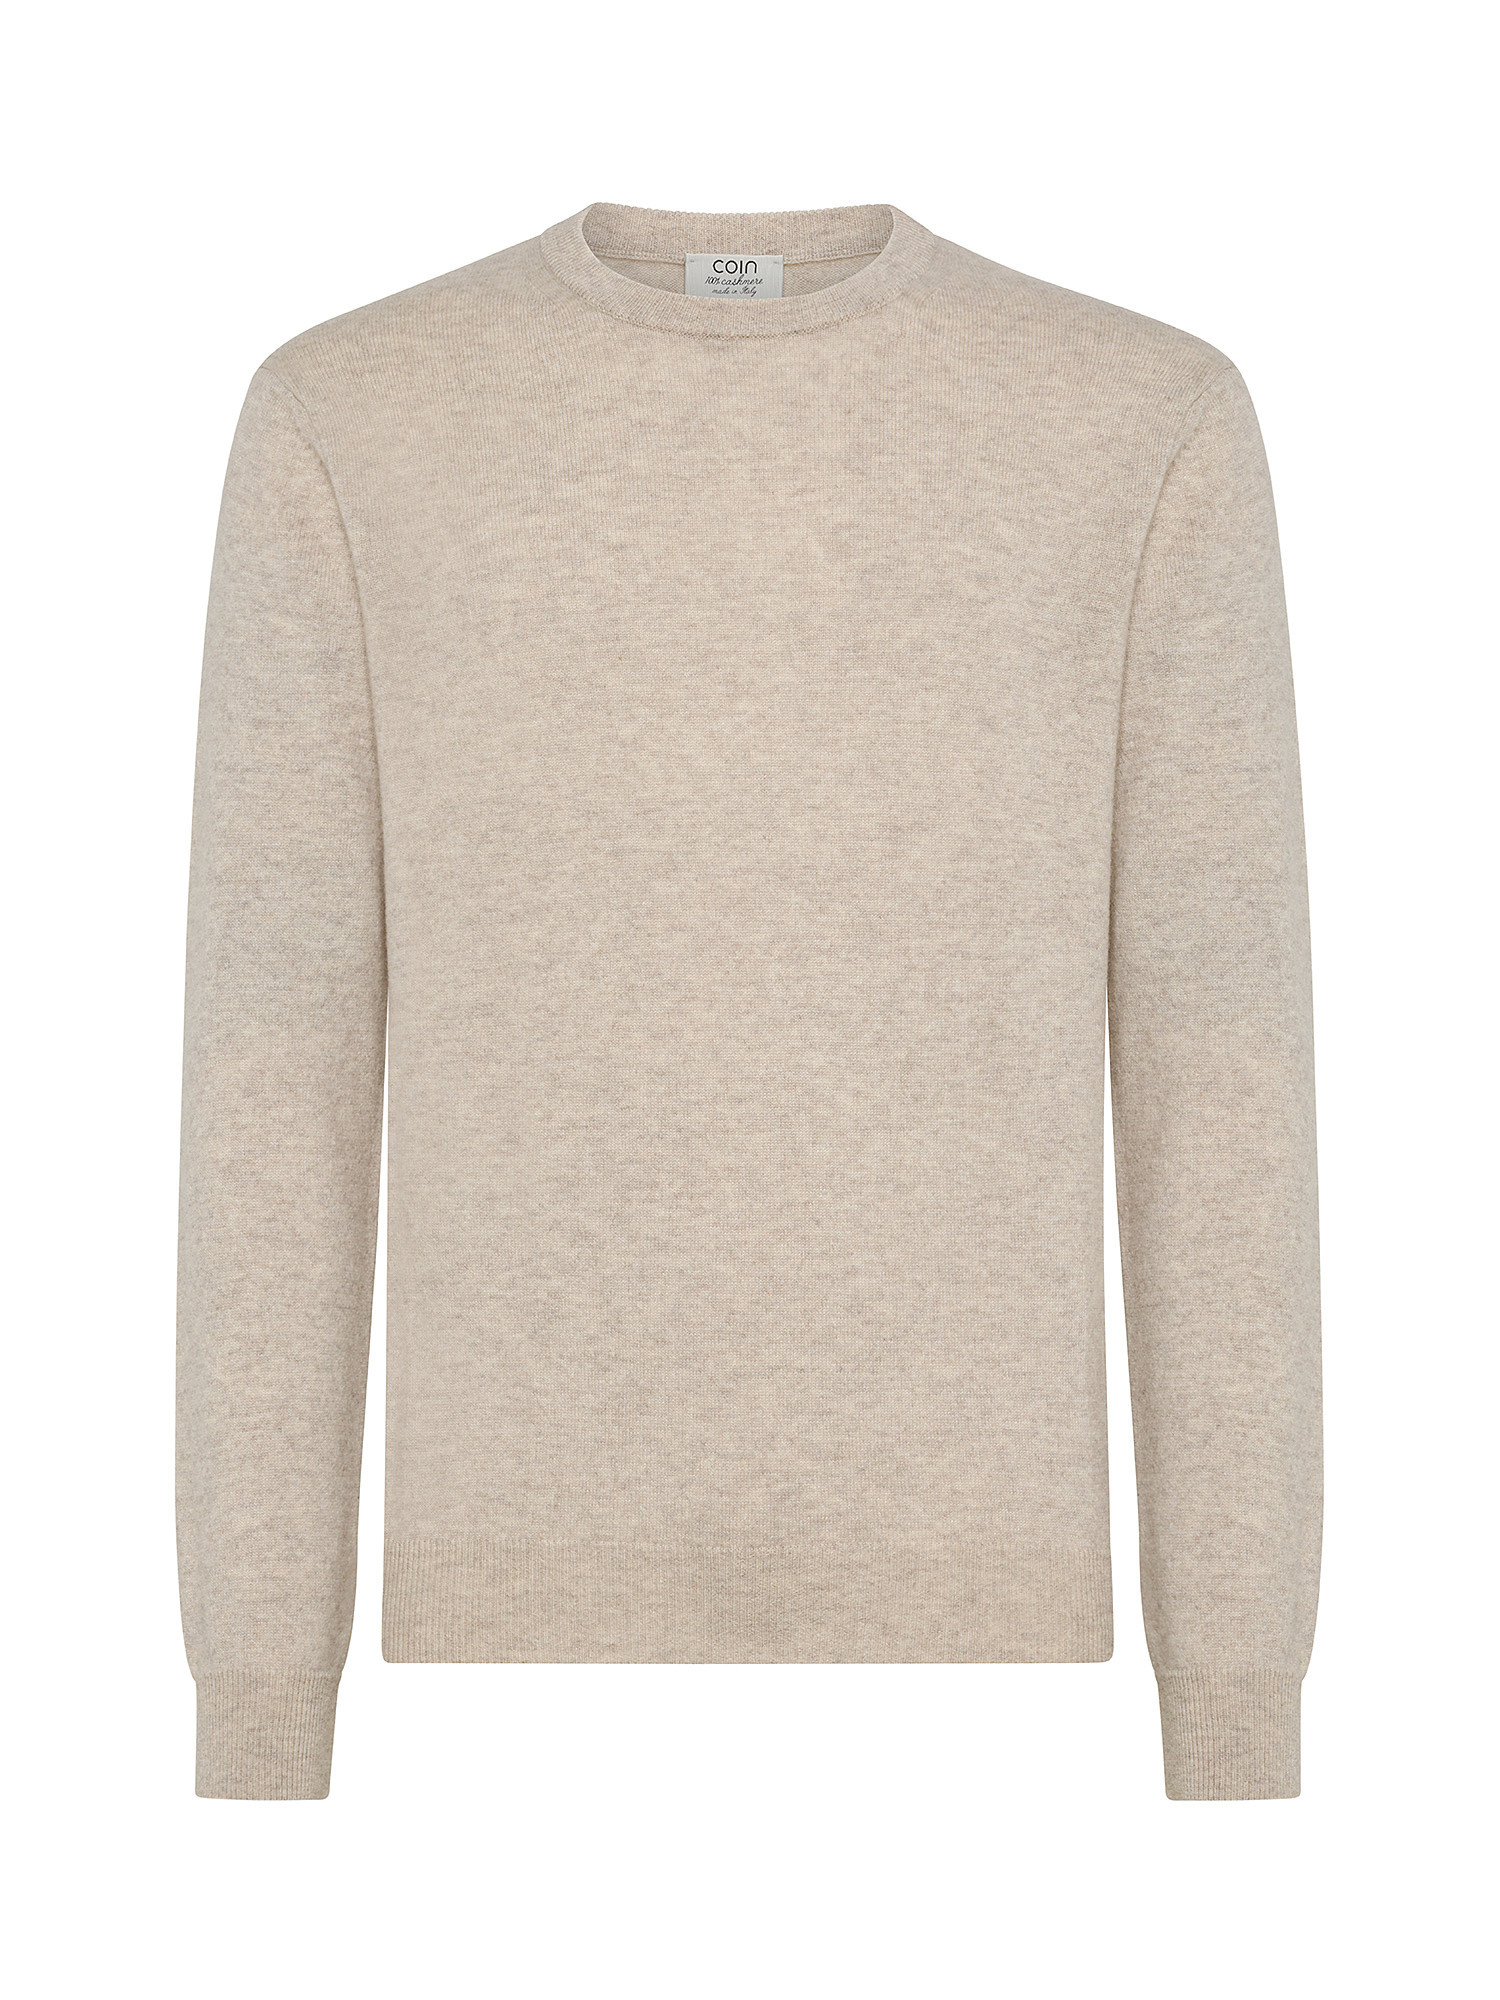 Coin Cashmere - Crewneck sweater in pure cashmere, Beige, large image number 0